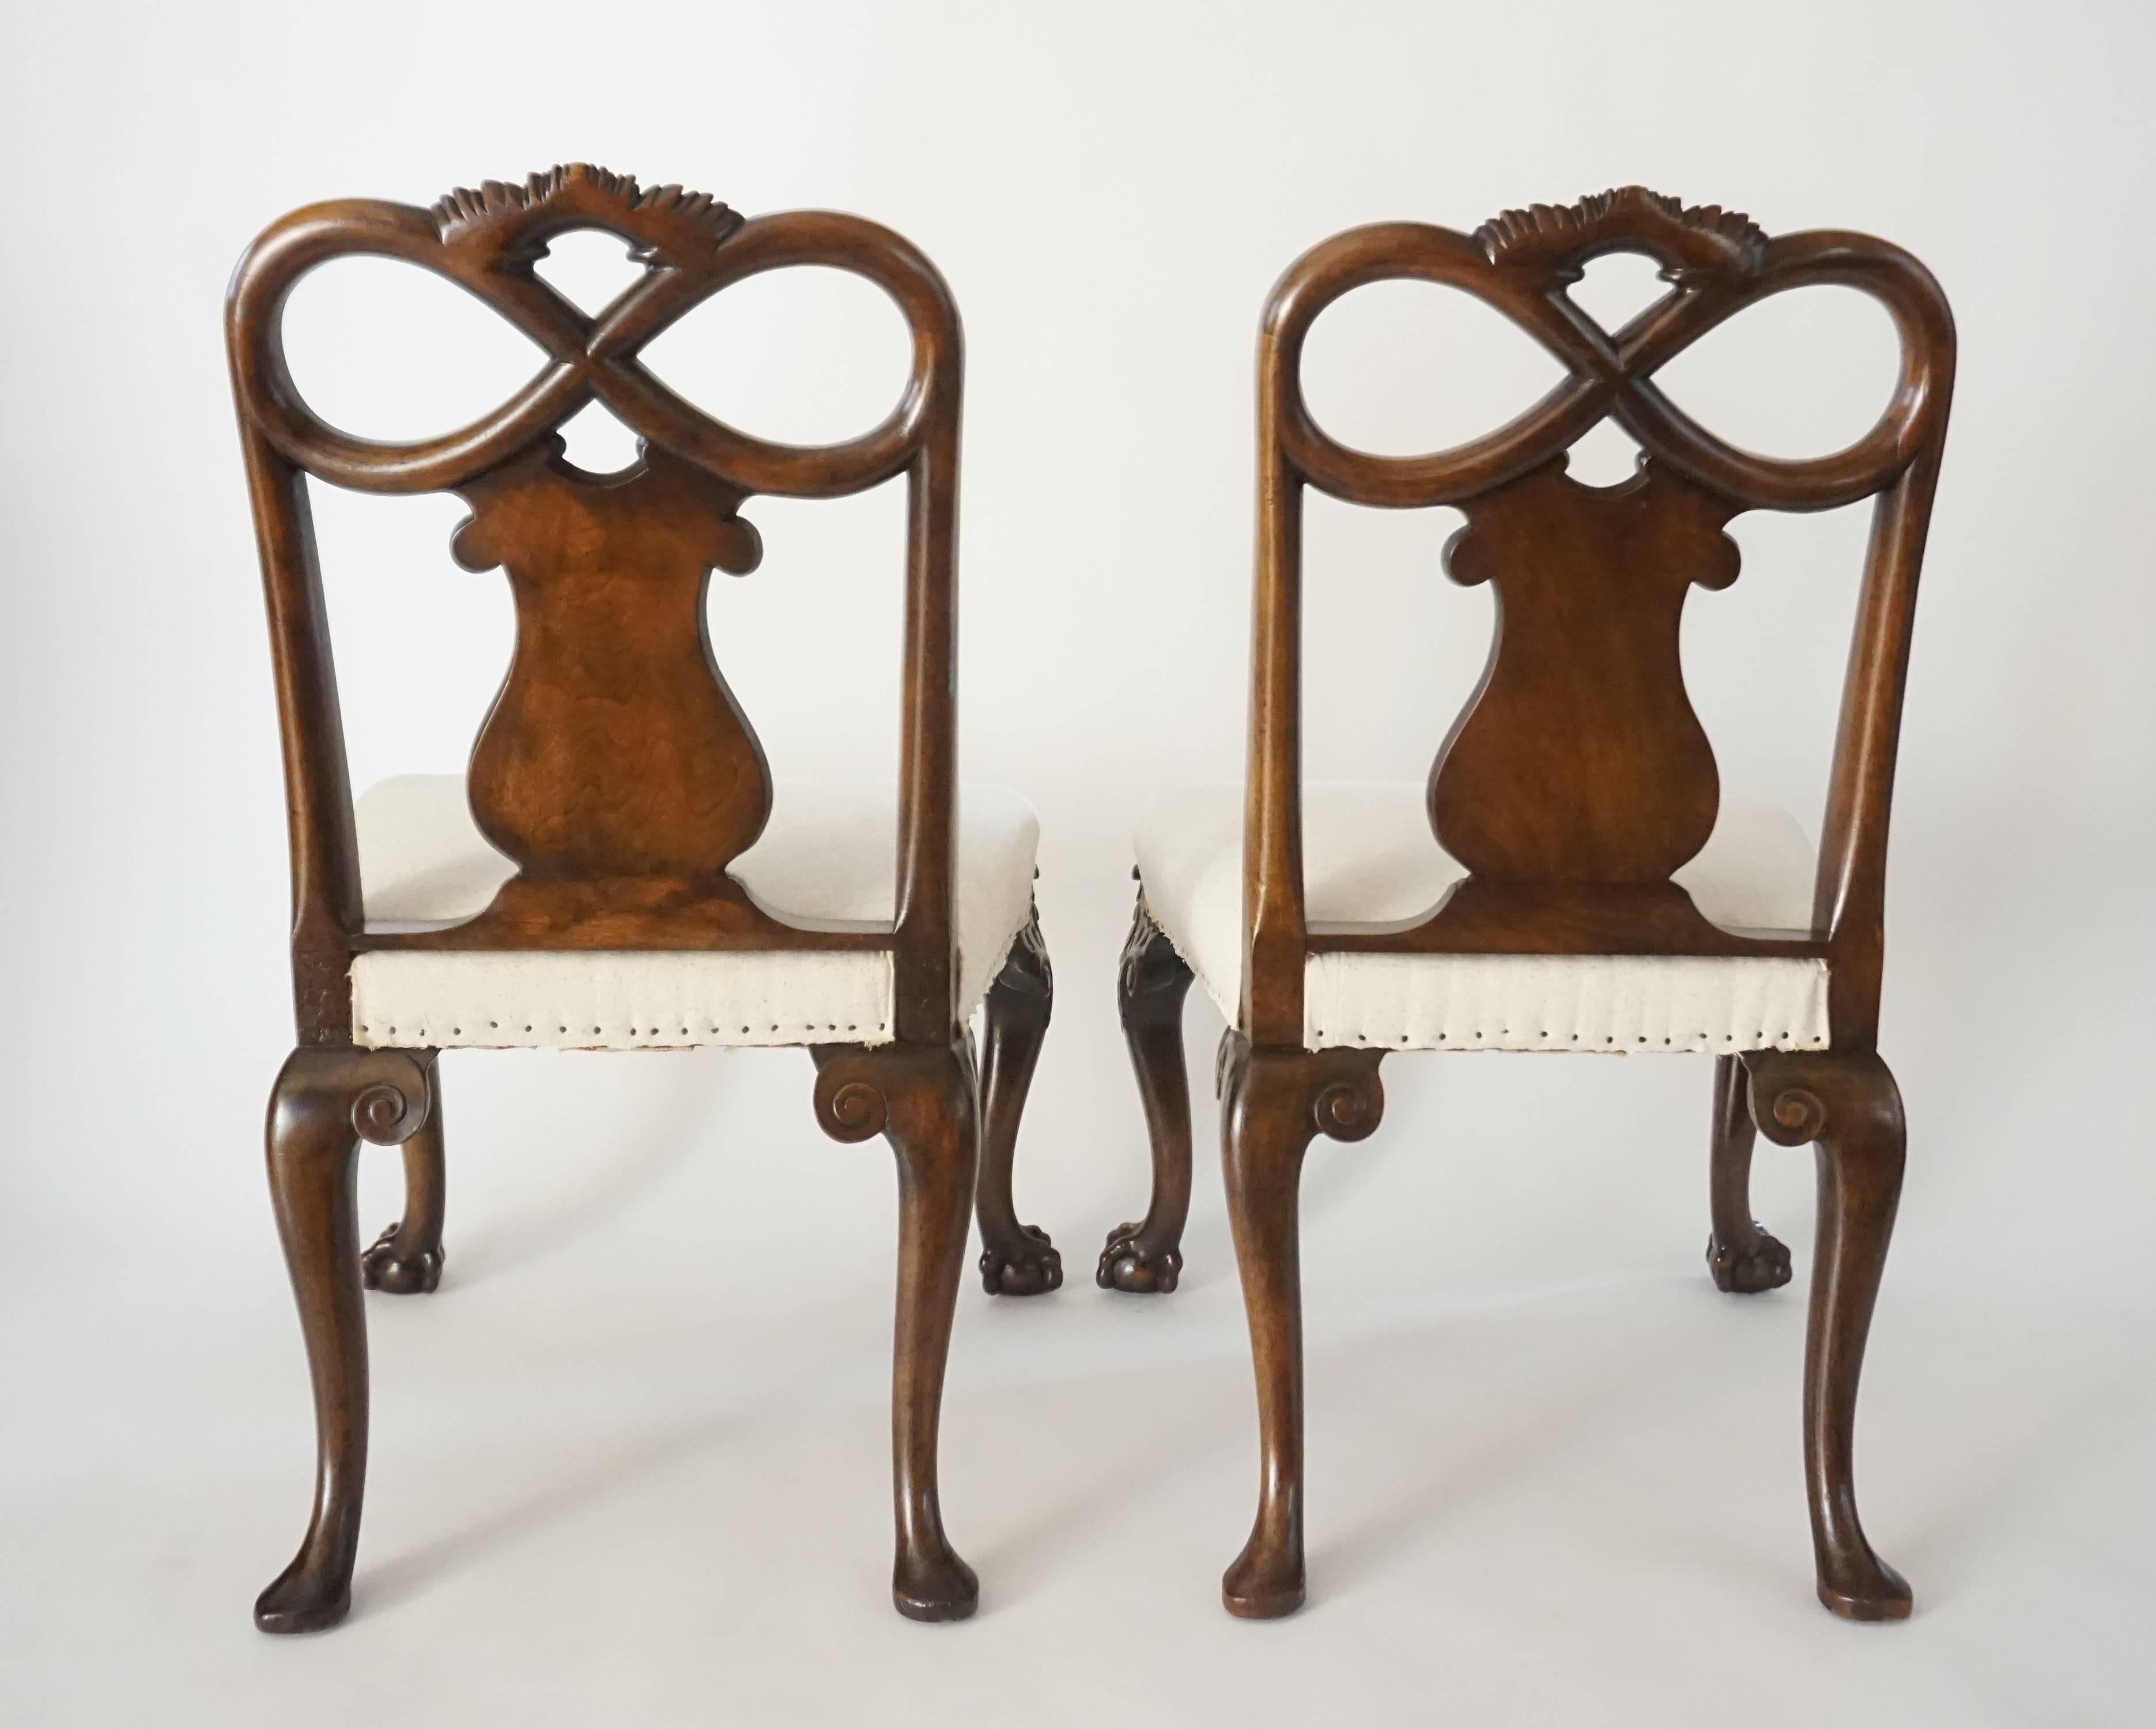 An exceptional pair of English George II, circa 1740, Rococo style bench-made side chairs having exquisitely carved walnut frames with Rococo 